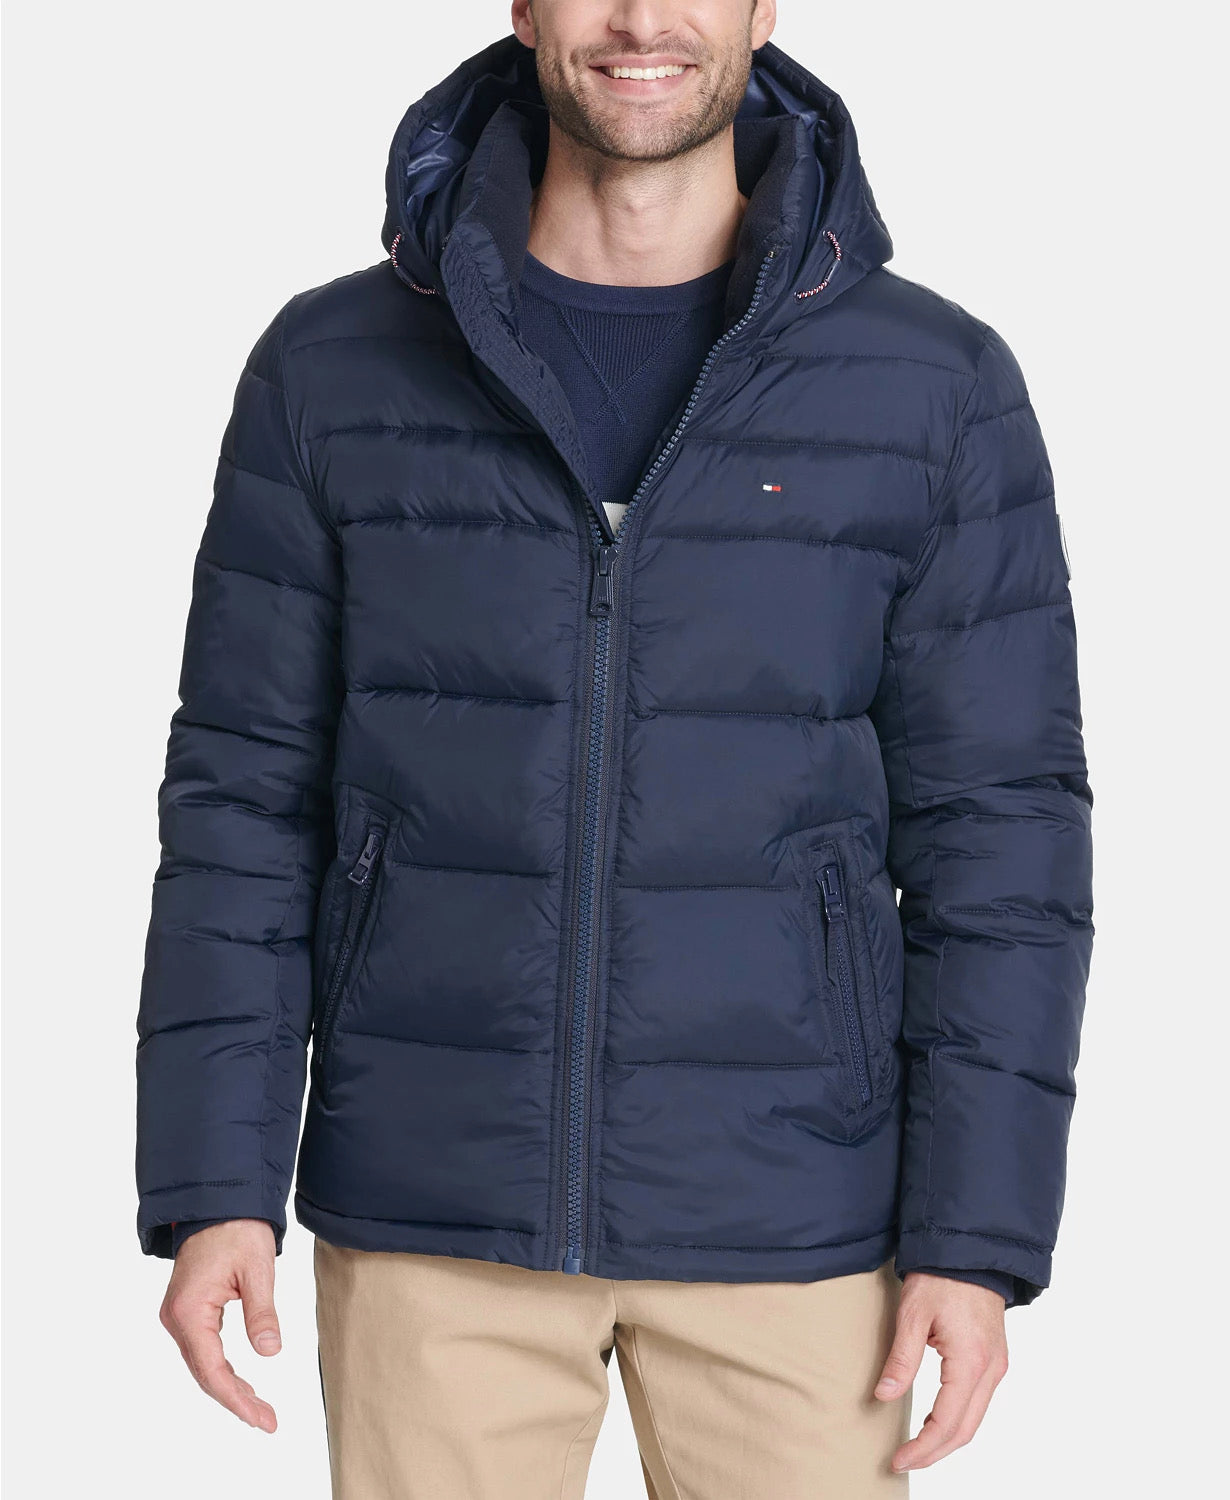 Tommy Hilfiger Men's Quilted Puffer Jacket Navy Blue Large